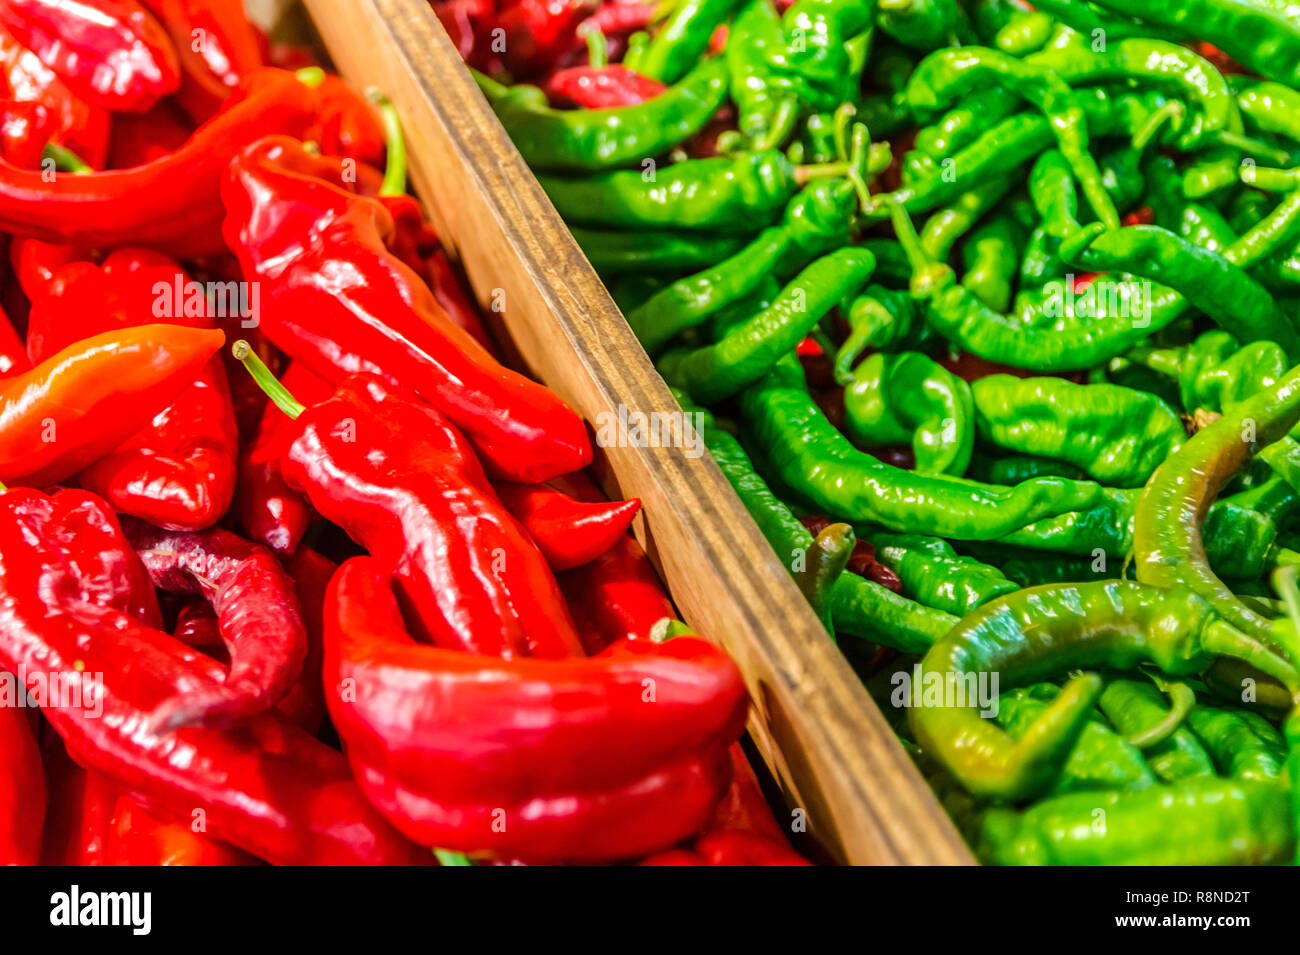 A wide variety of peppers, including Italian sweet peppers and long hot peppers, are displayed at Buford Highway Farmers Market in Doraville, Georgia. Stock Photo